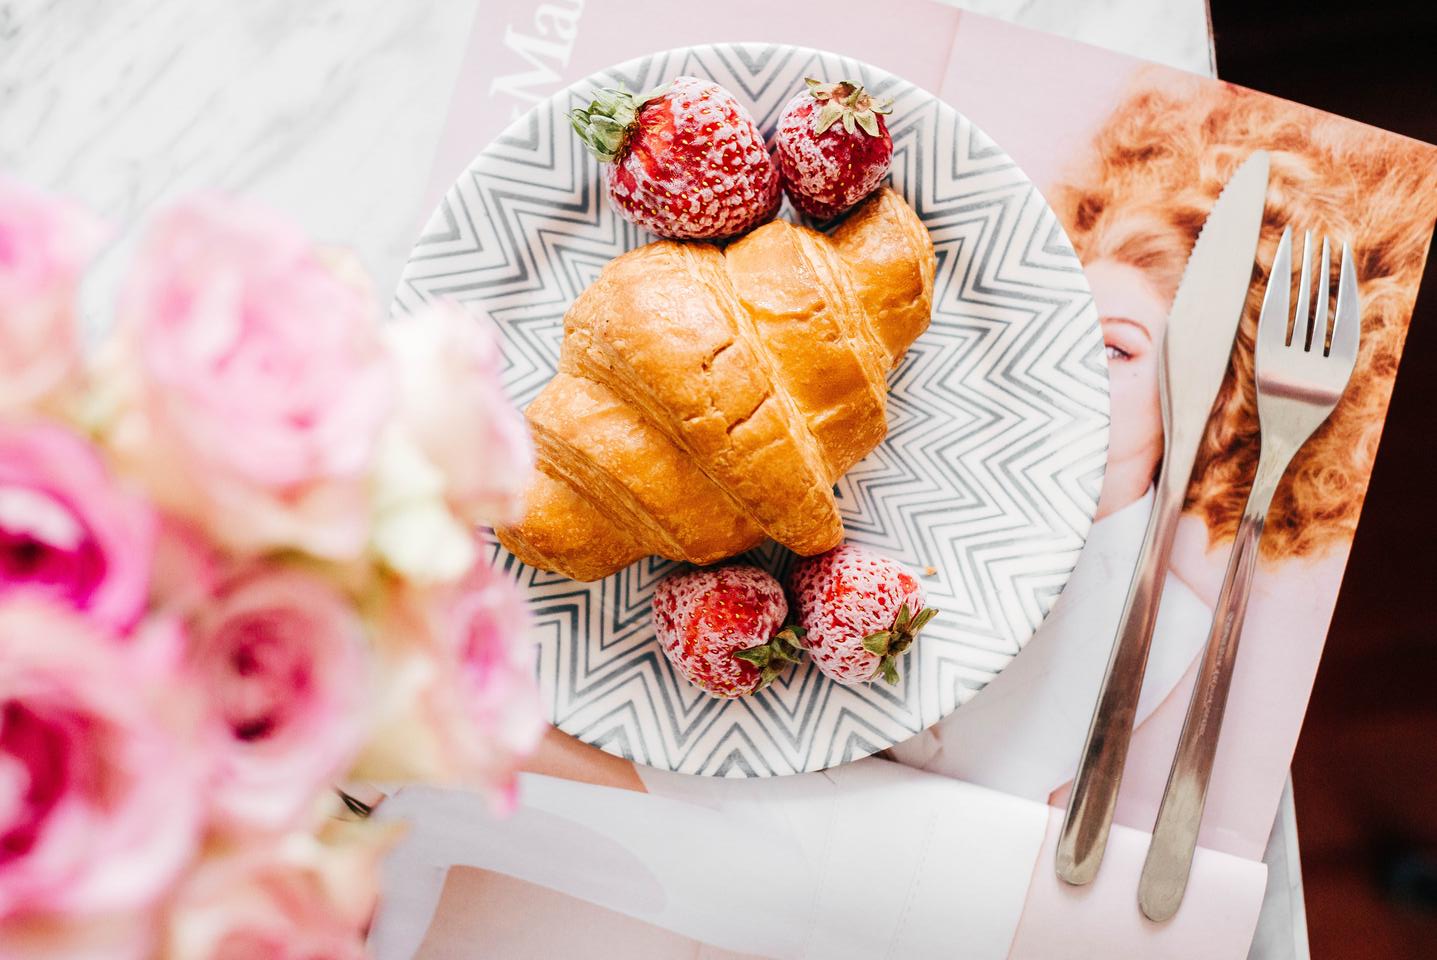 What Pizza Matches Your Vibe? Quiz Croissant with berries